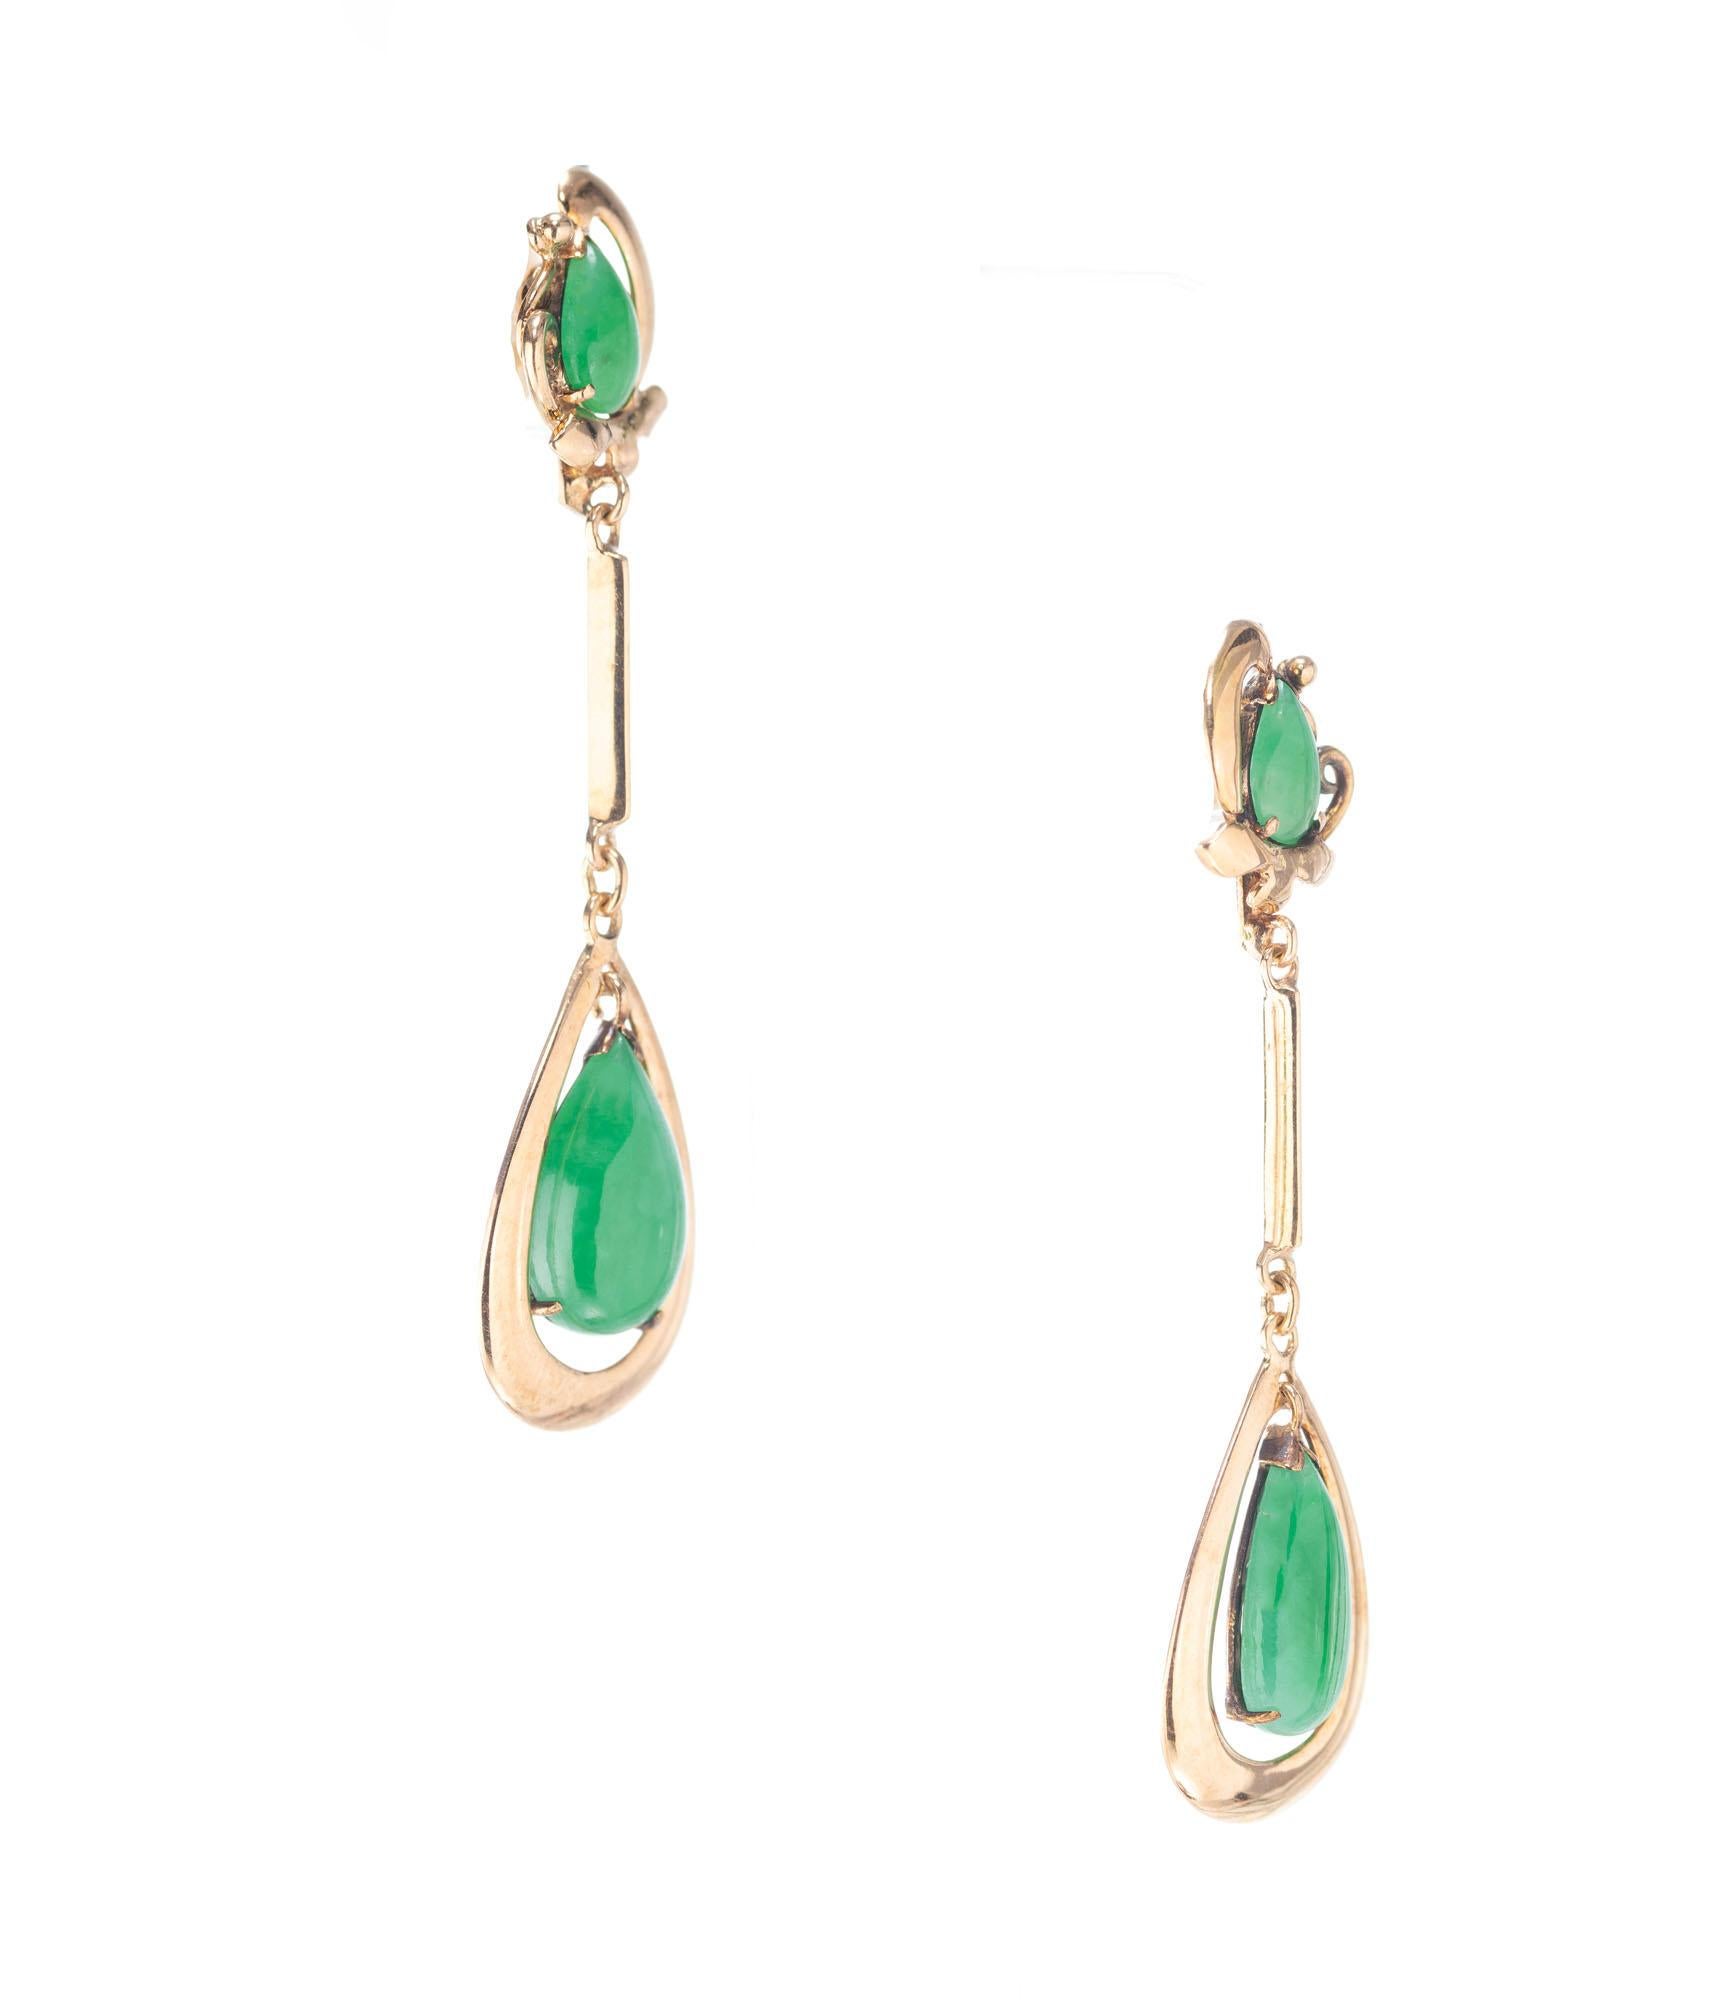 Beautiful classic 1940’s 14k rose gold European made dangle earrings. Set with genuine translucent untreated GIA Certified Jadeite Jade on the top and the bottom. The bottom pear shape stones dangle inside their frame. These have just enough motion